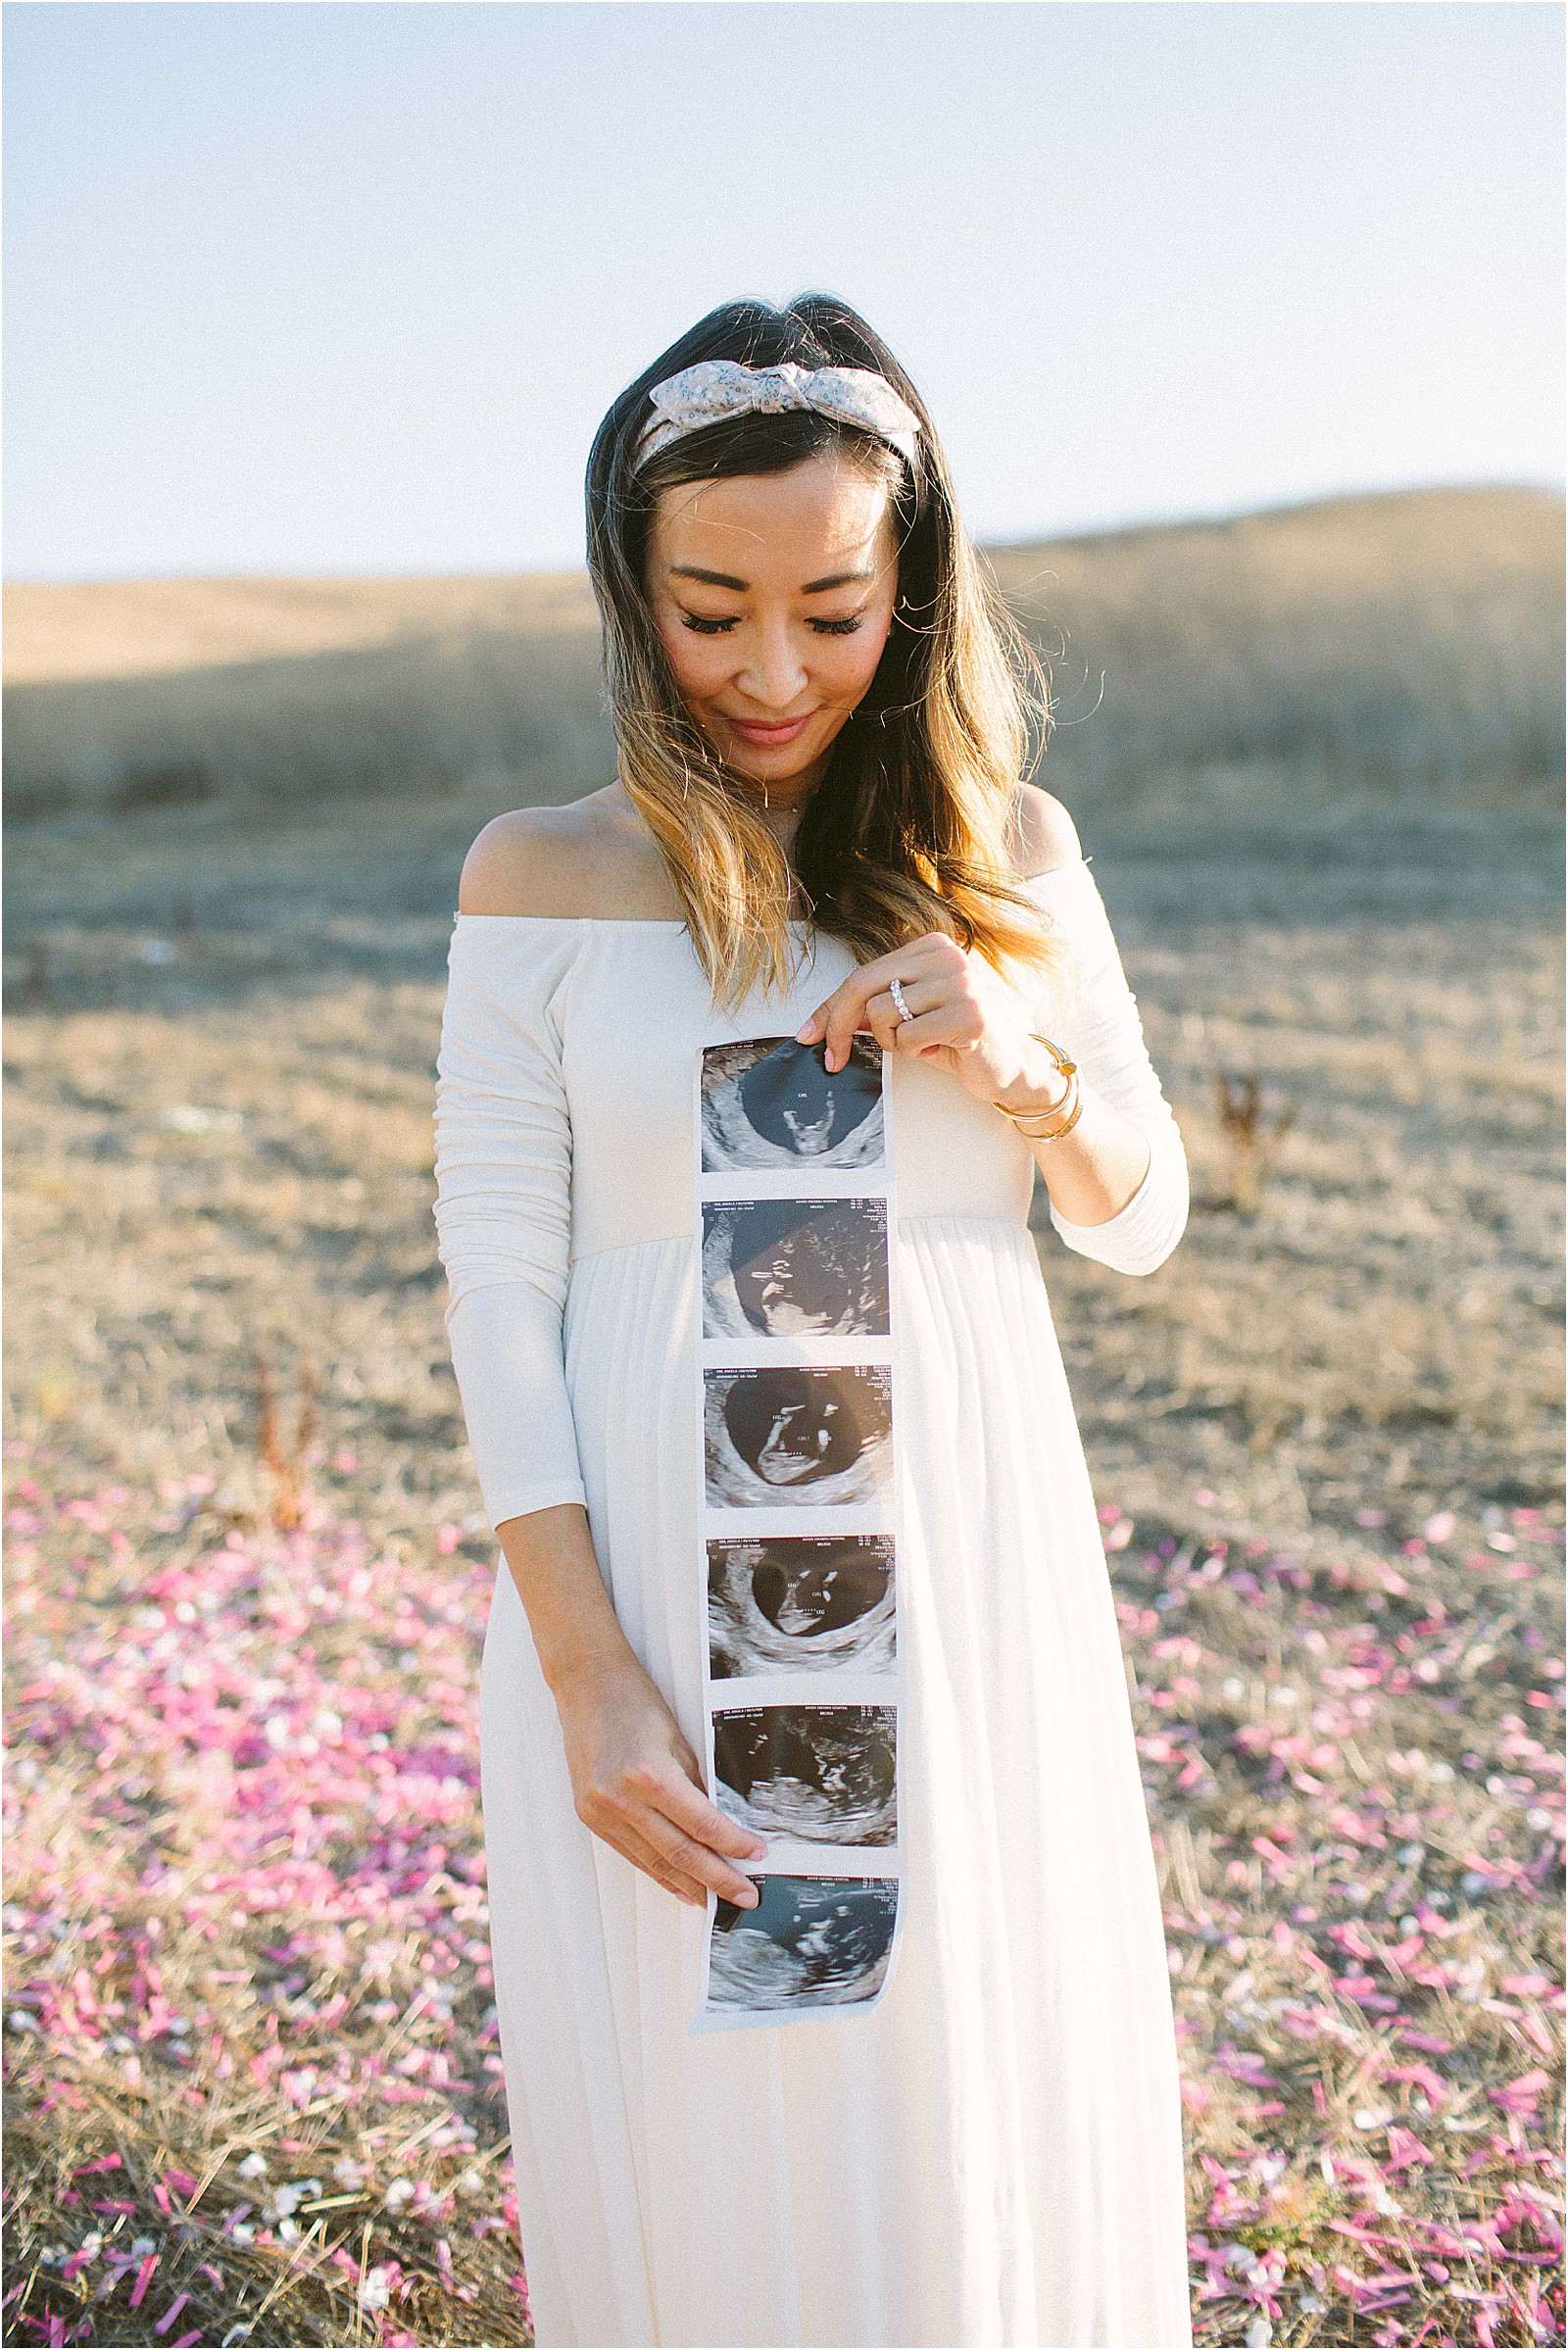 Baby Shower Outfit Ideas